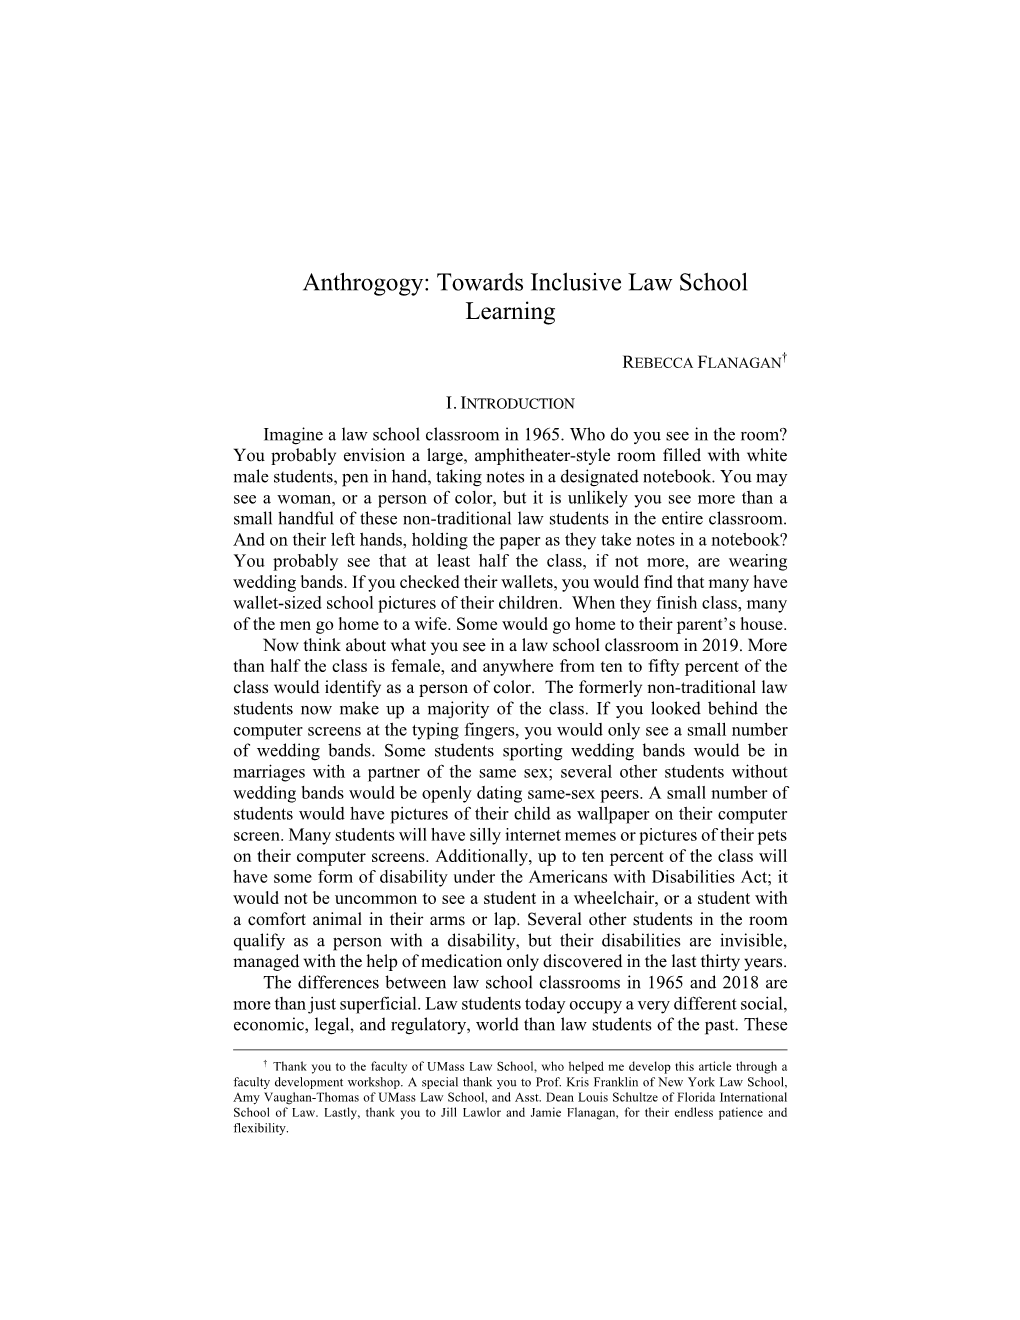 Anthrogogy: Towards Inclusive Law School Learning